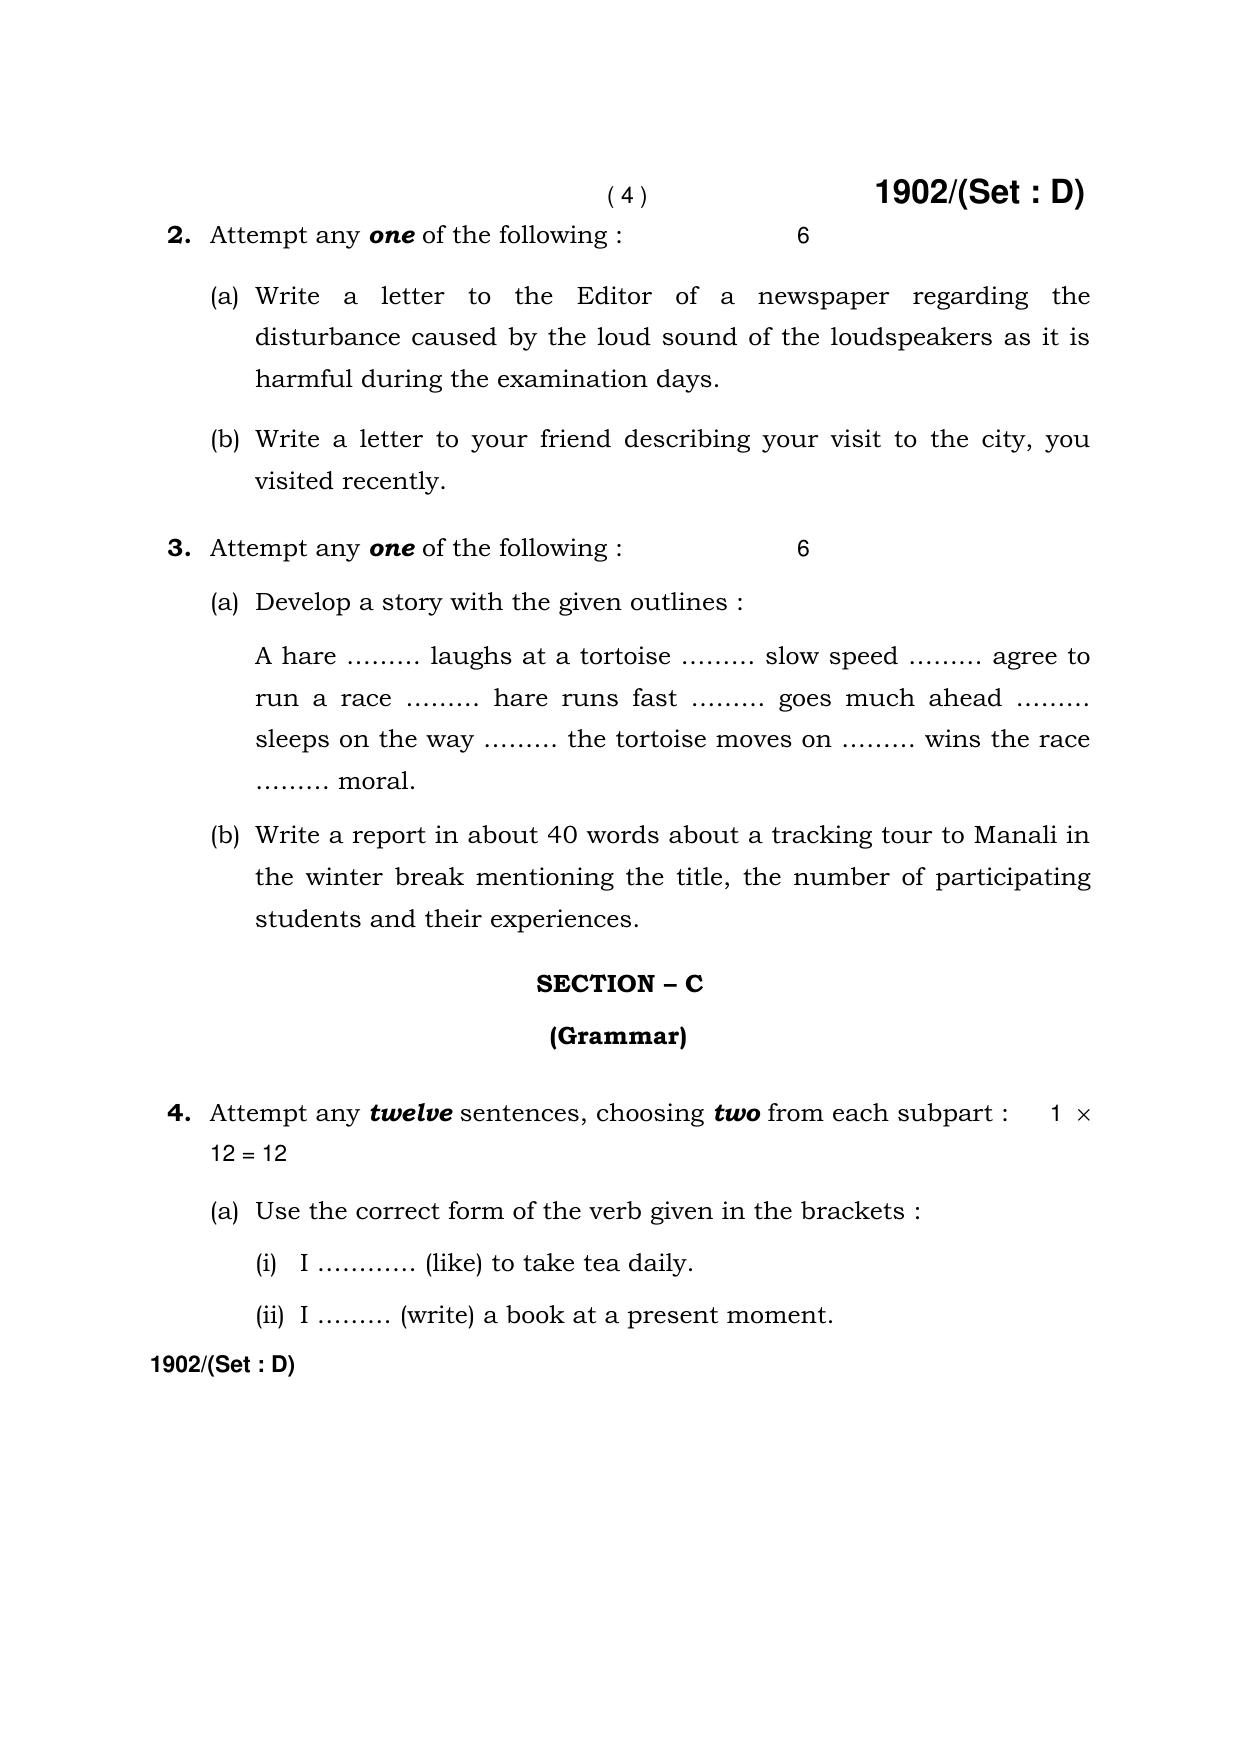 Haryana Board HBSE Class 10 English -D 2017 Question Paper - Page 4